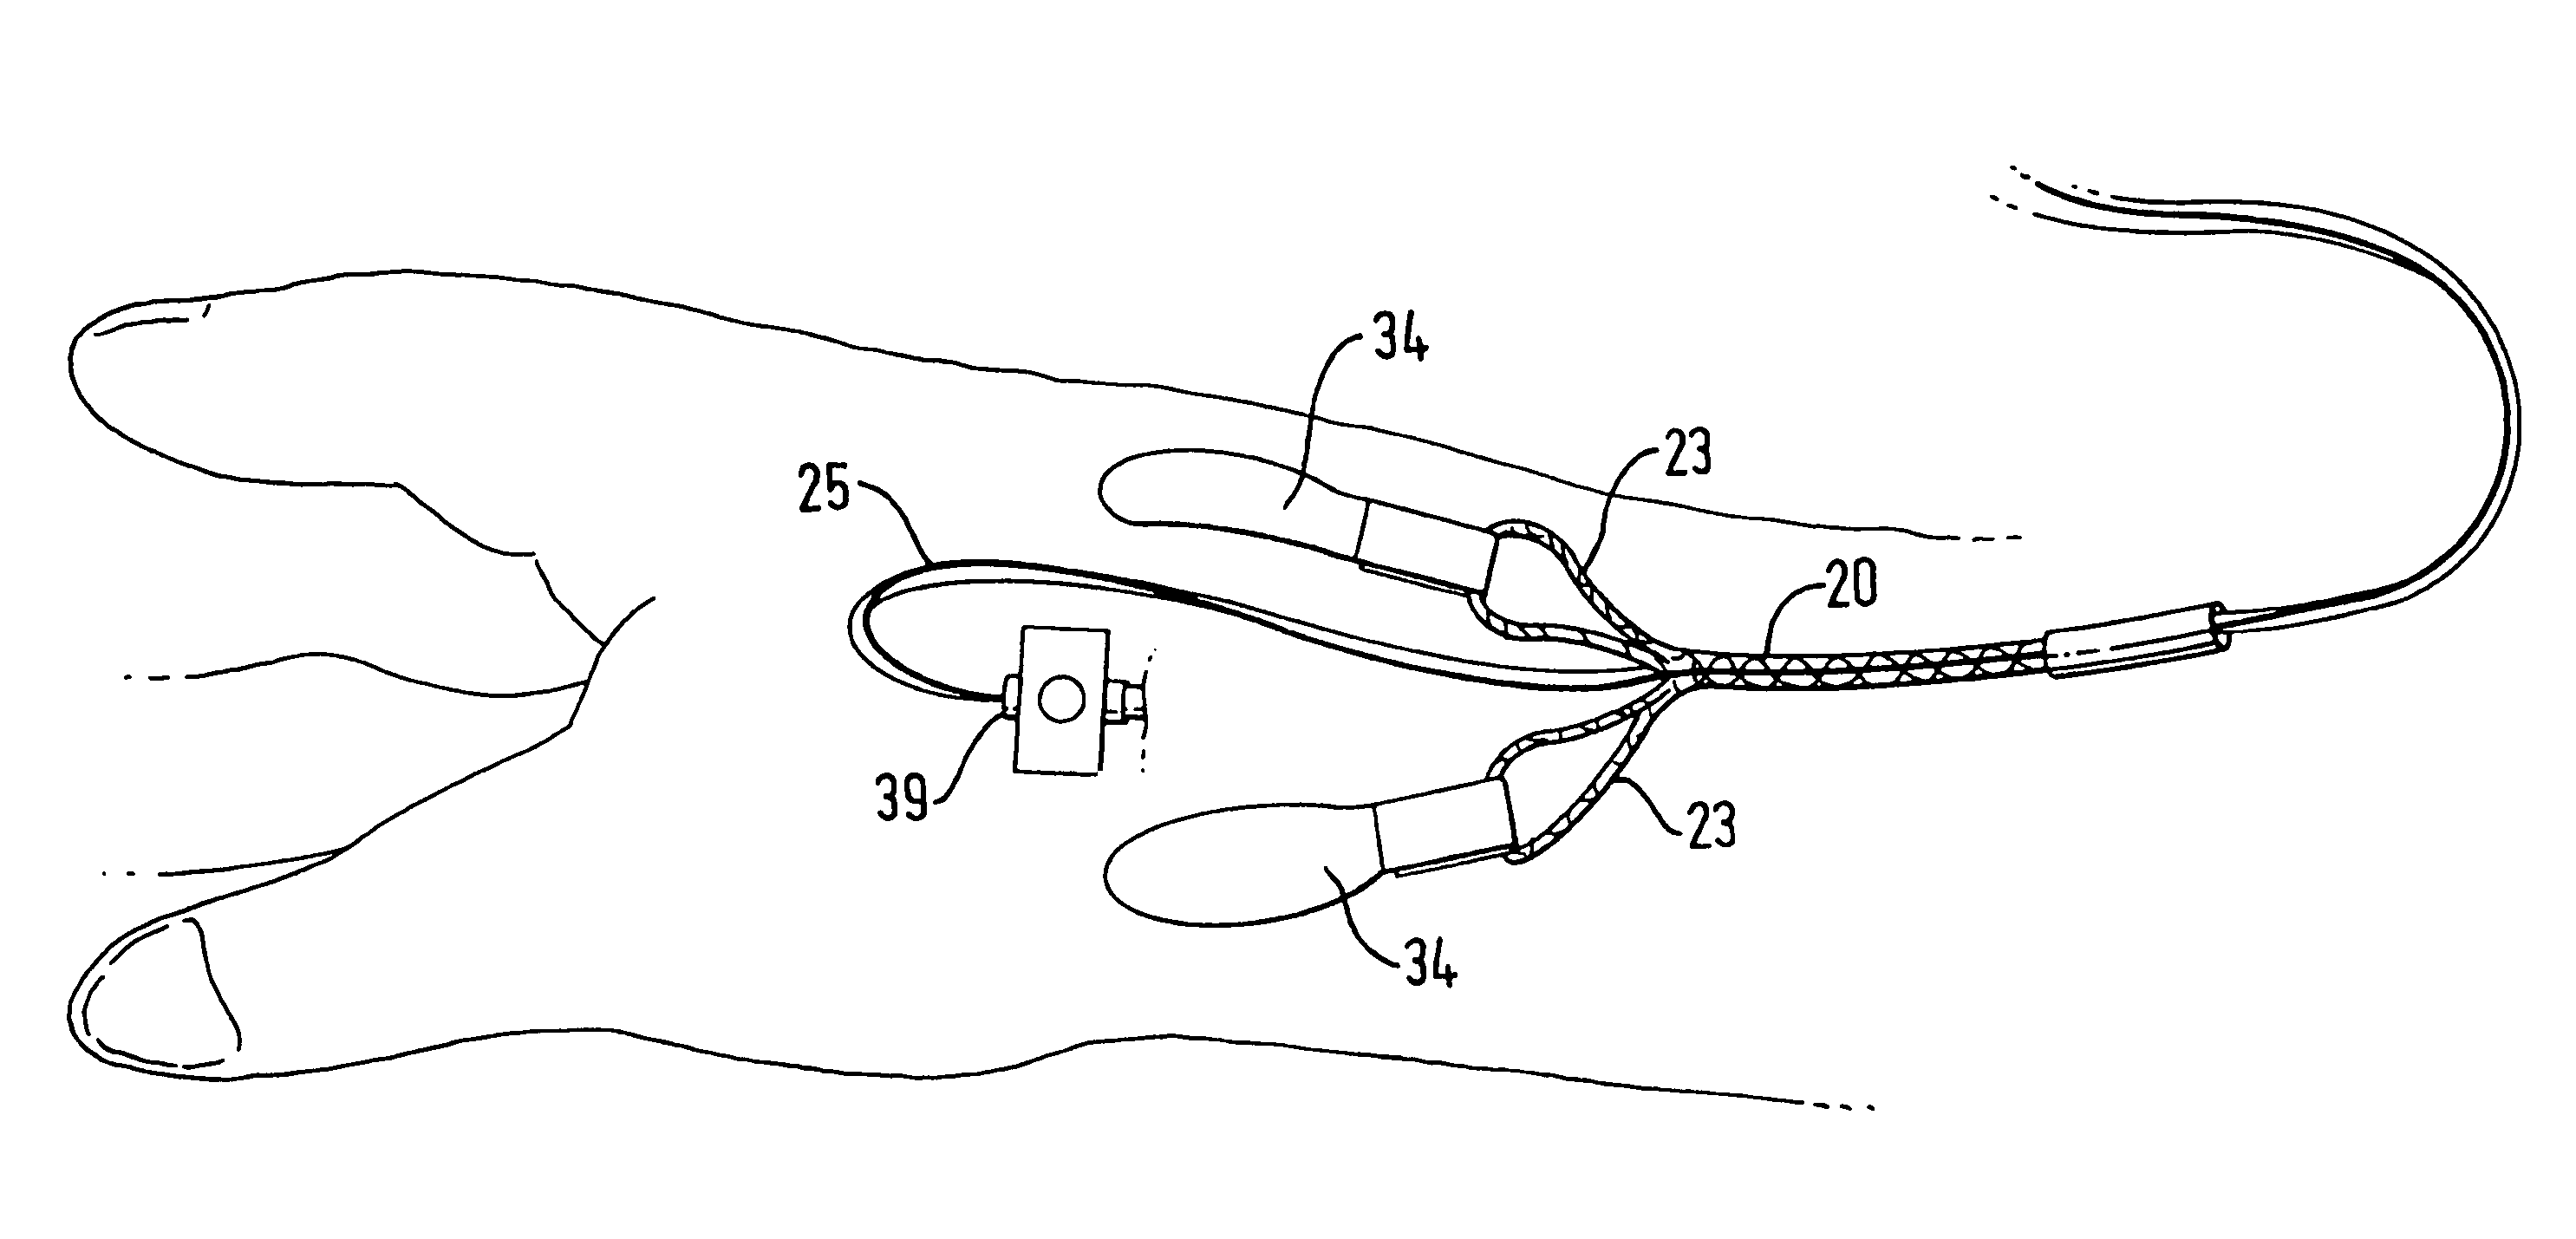 Method of securing a line to a patient, fasteners and their use to secure a line to a patient